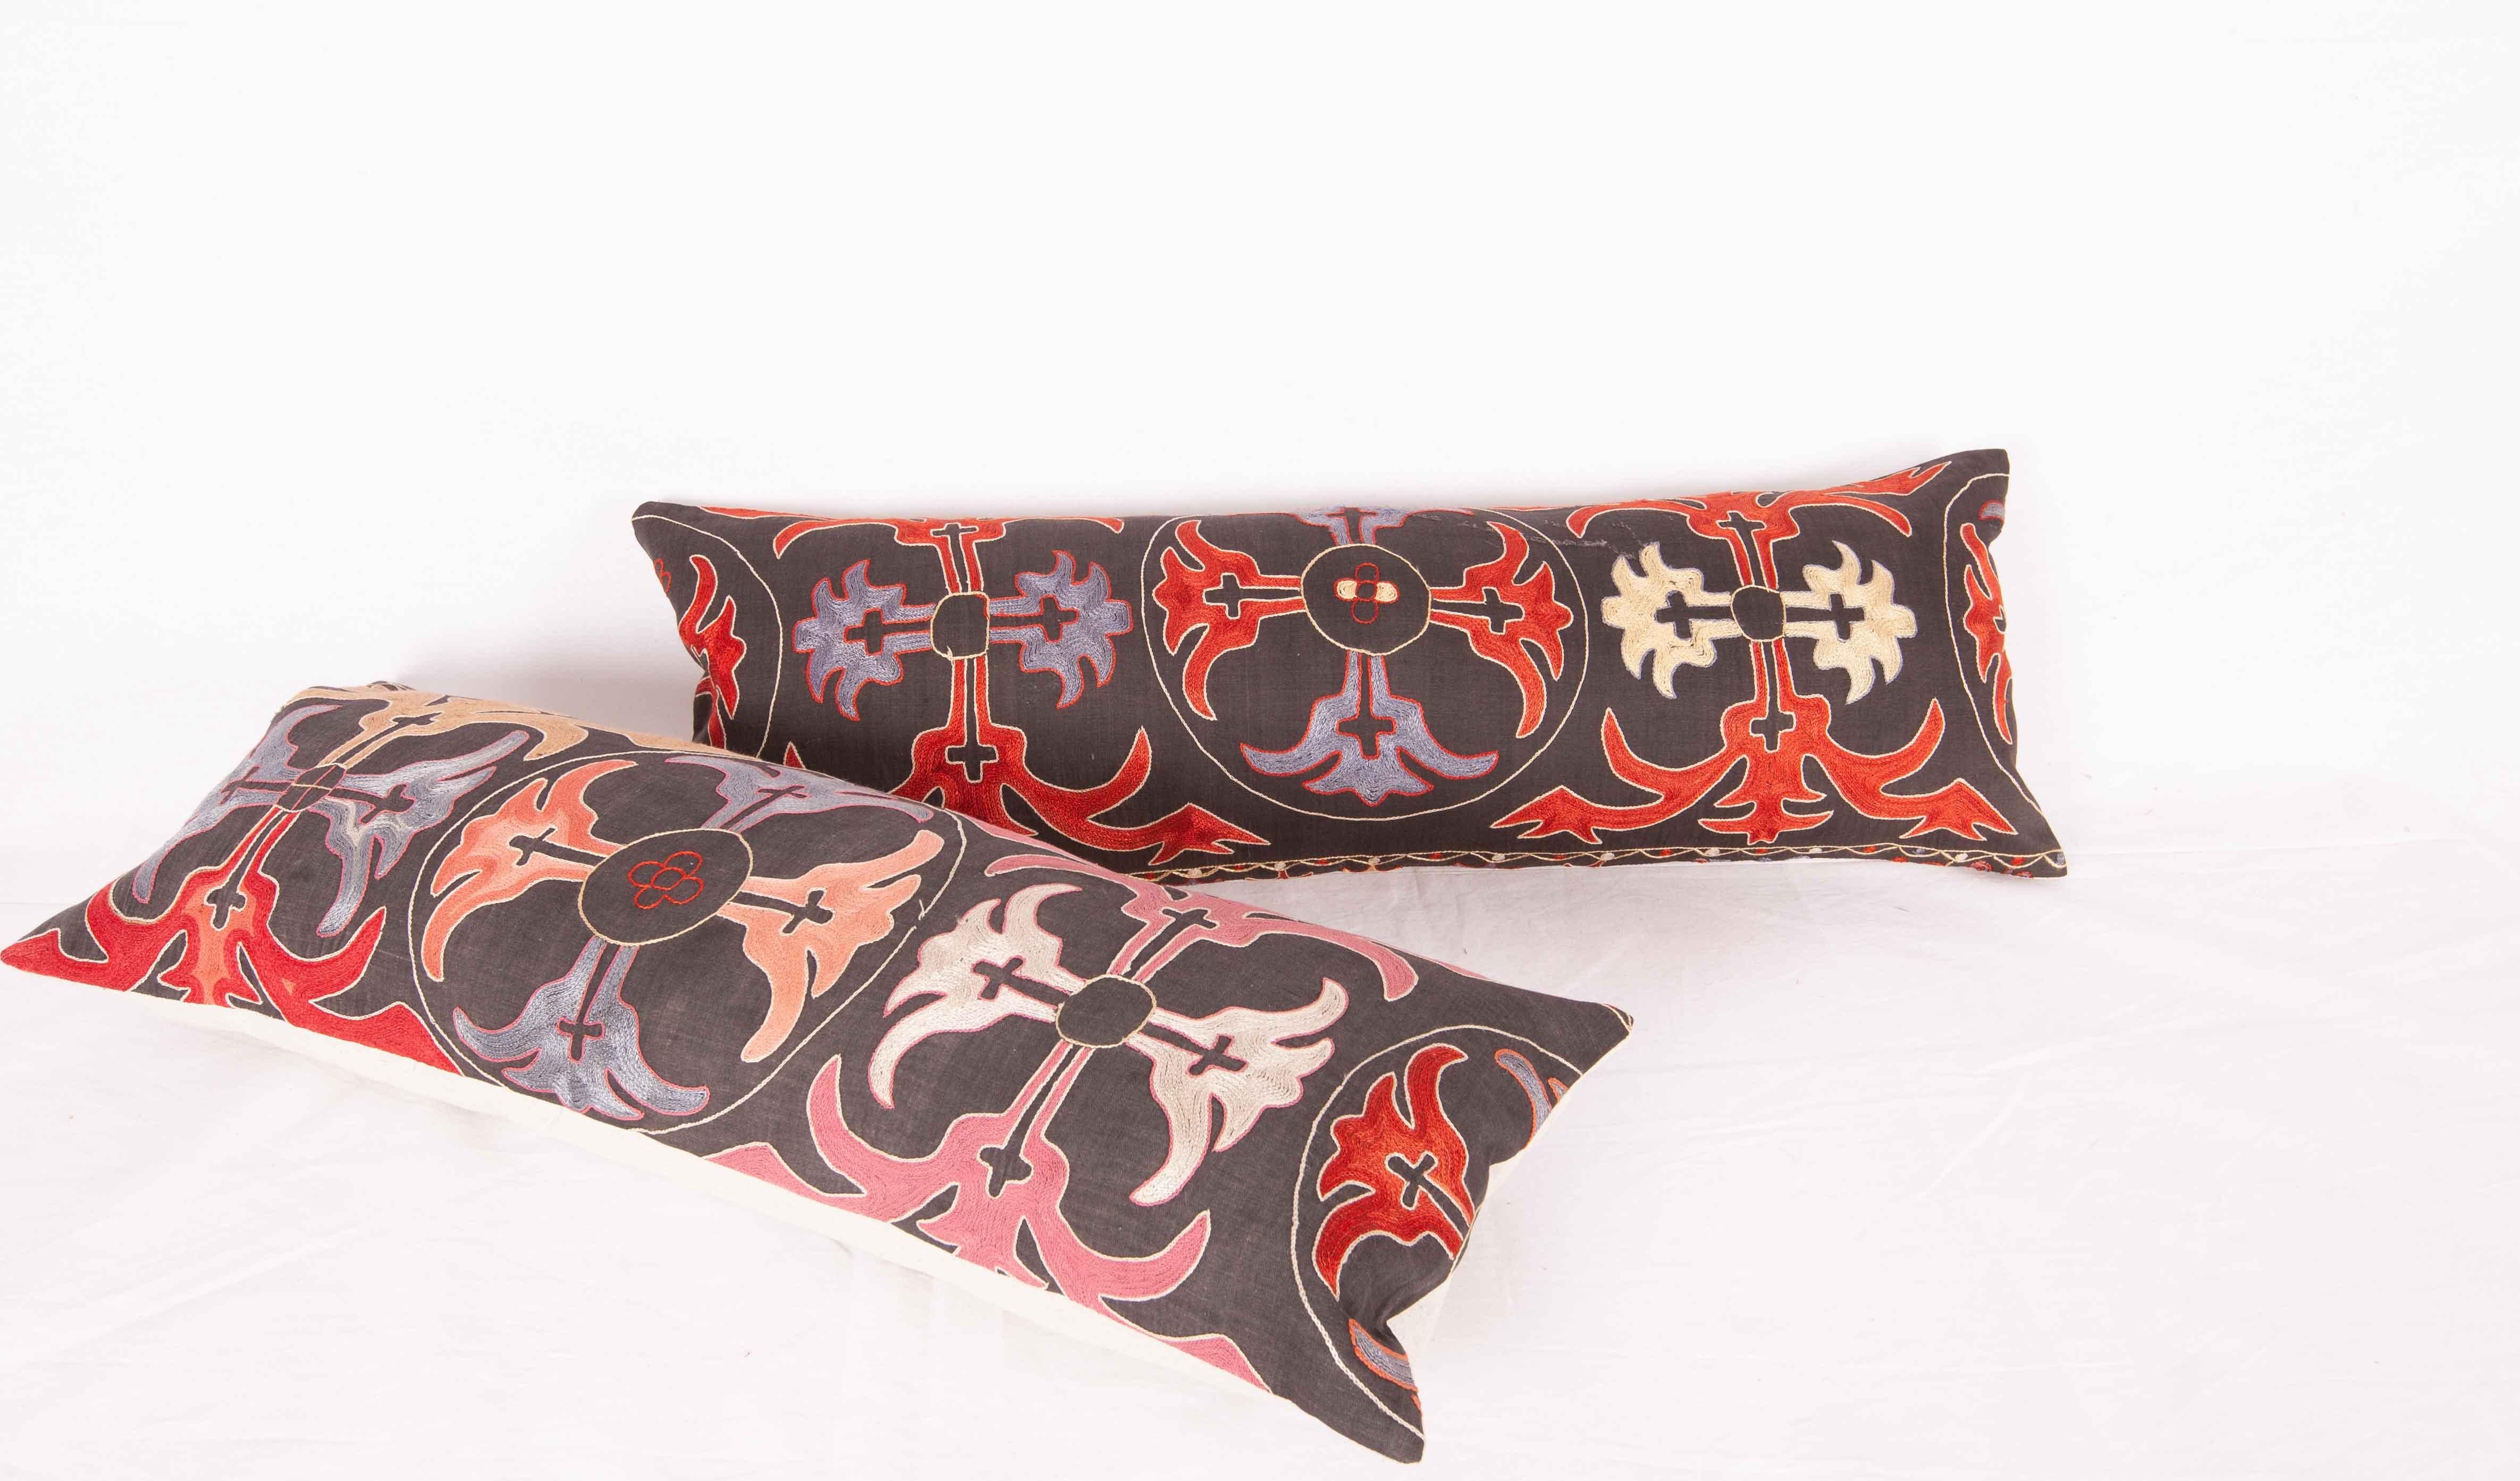 Suzani Vintage  Pillow Cases fashioned from a Kyrgyz or Kazak Embroidery